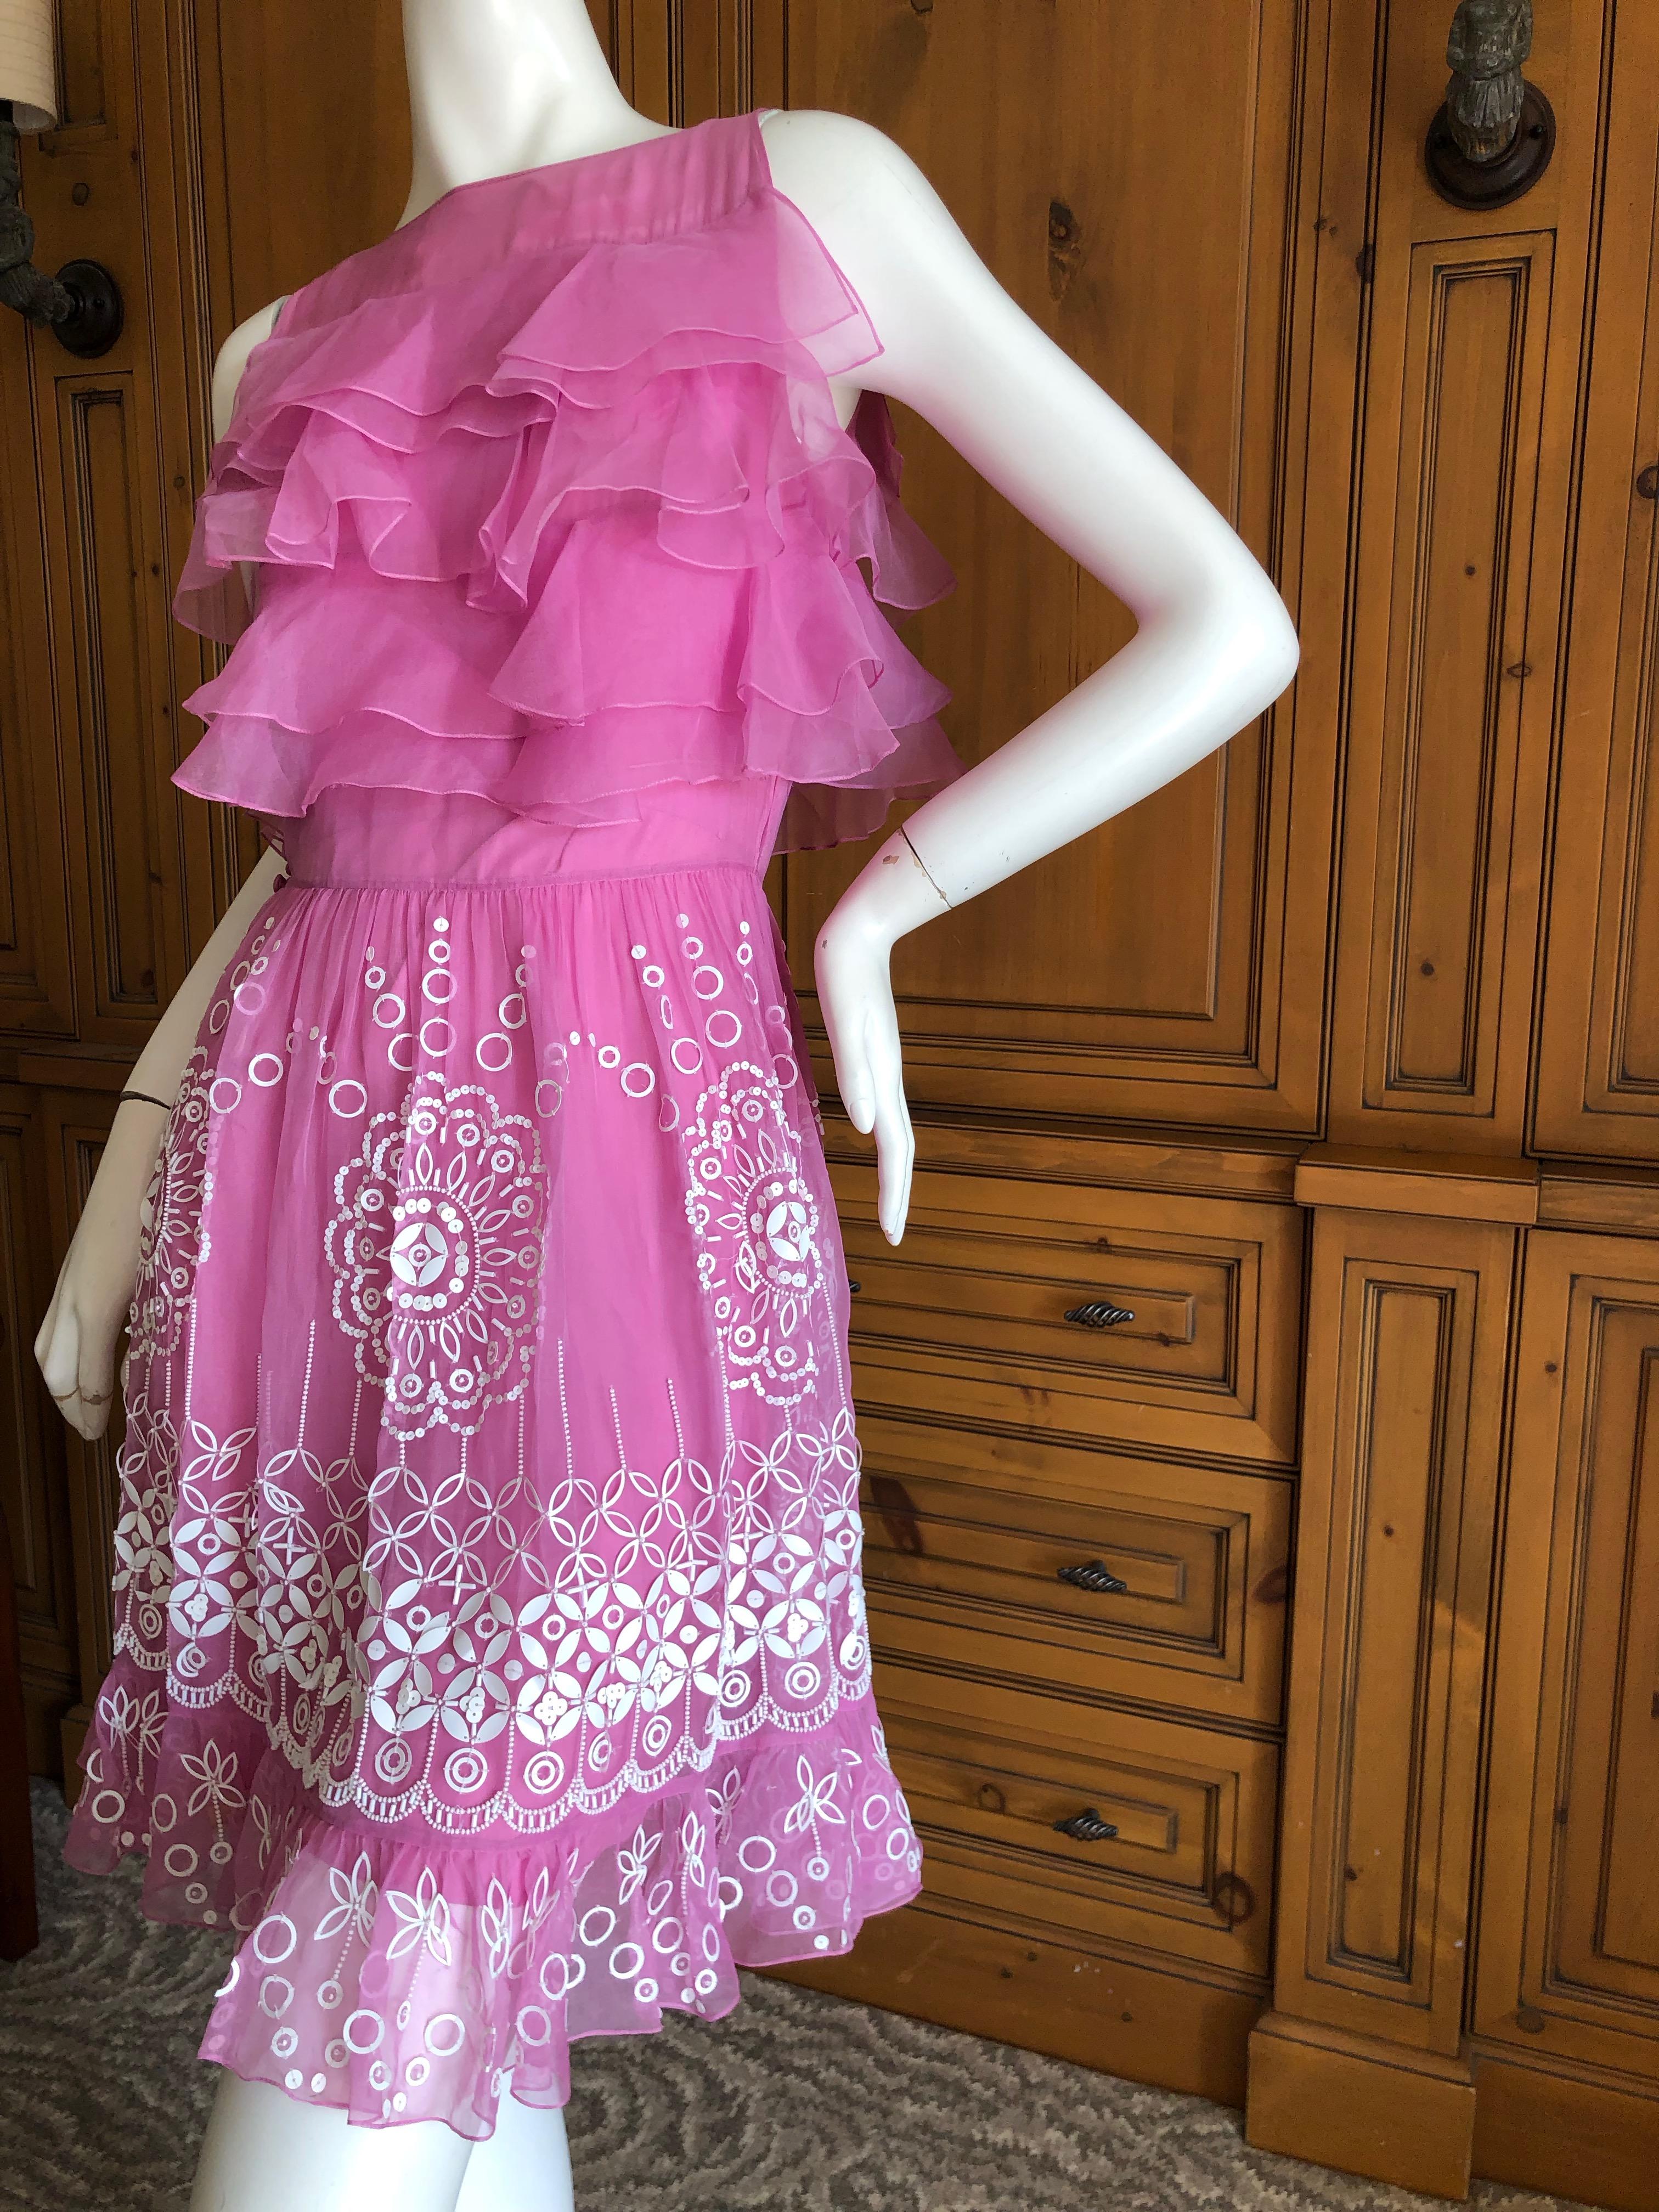 Christian Dior by John Galliano Pink Silk Dress with White Embellishments For Sale 5